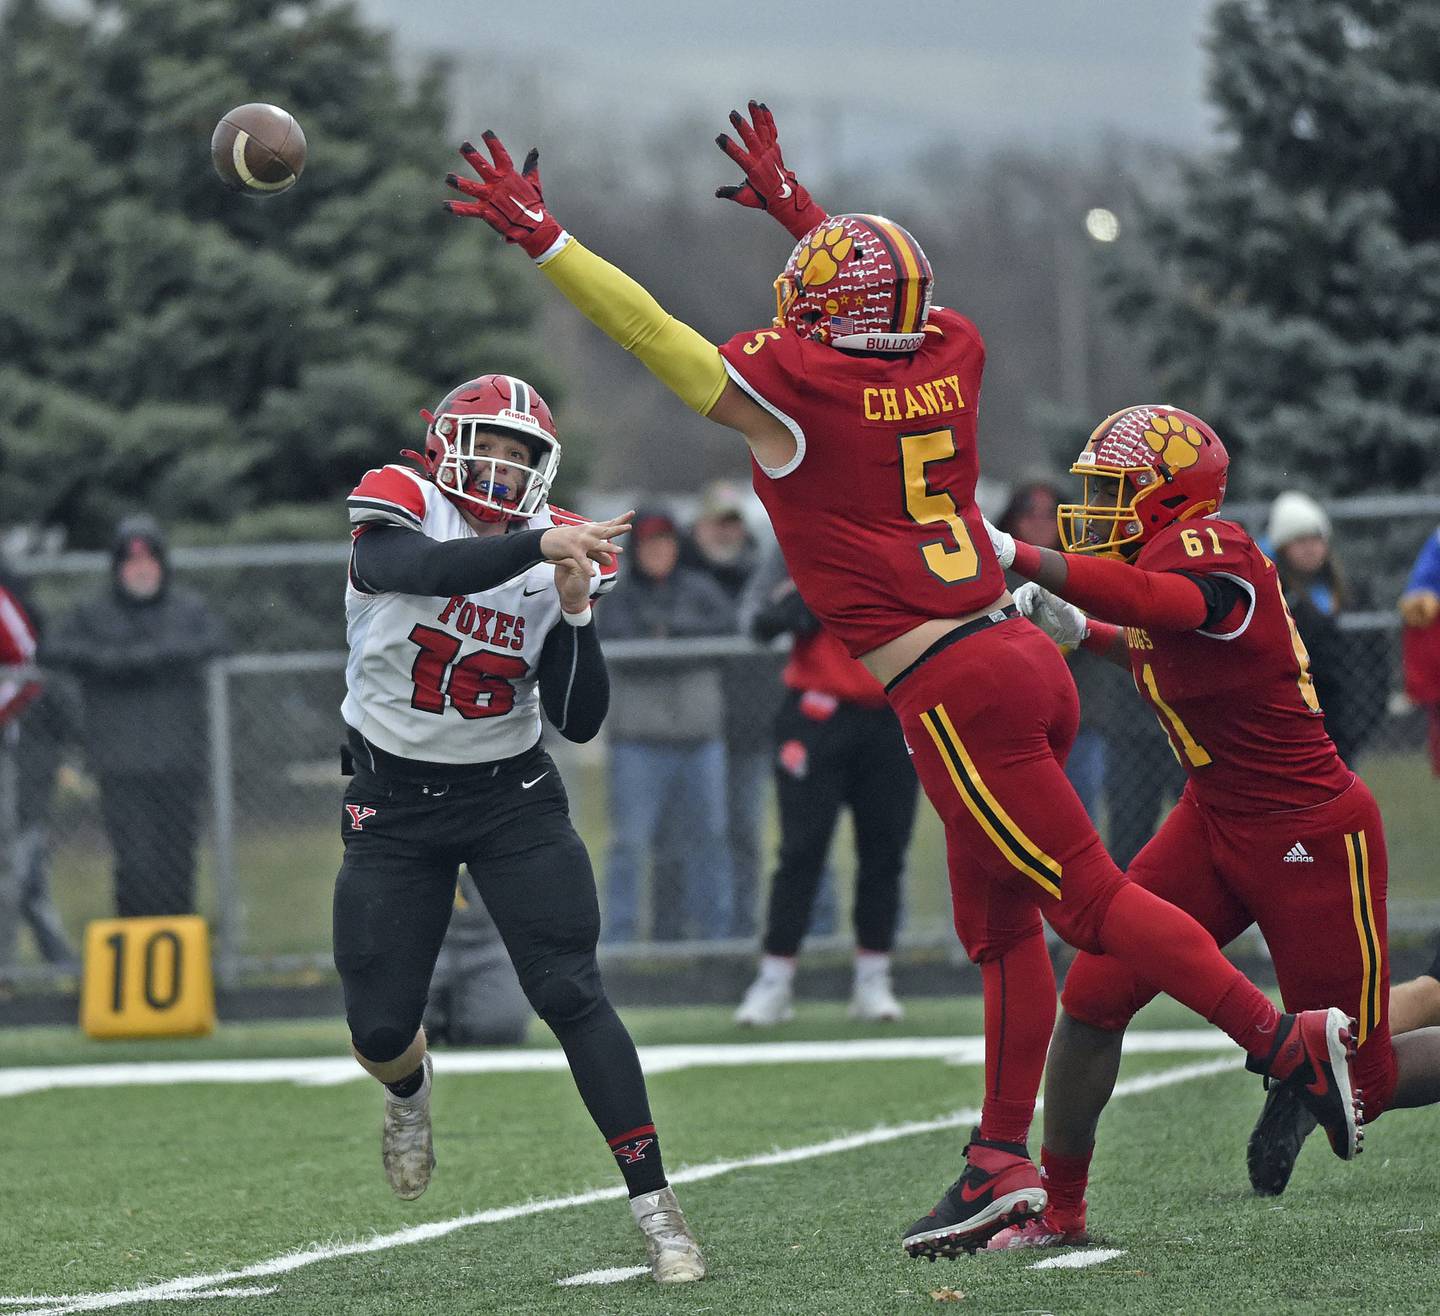 Yorkville quarterback Michael Dopart gets pressured by Batavia's JP Chaney and Jordan Buckley during a Class 7A state quarterfinal game in Batavia on Saturday, Nov. 12, 2022.